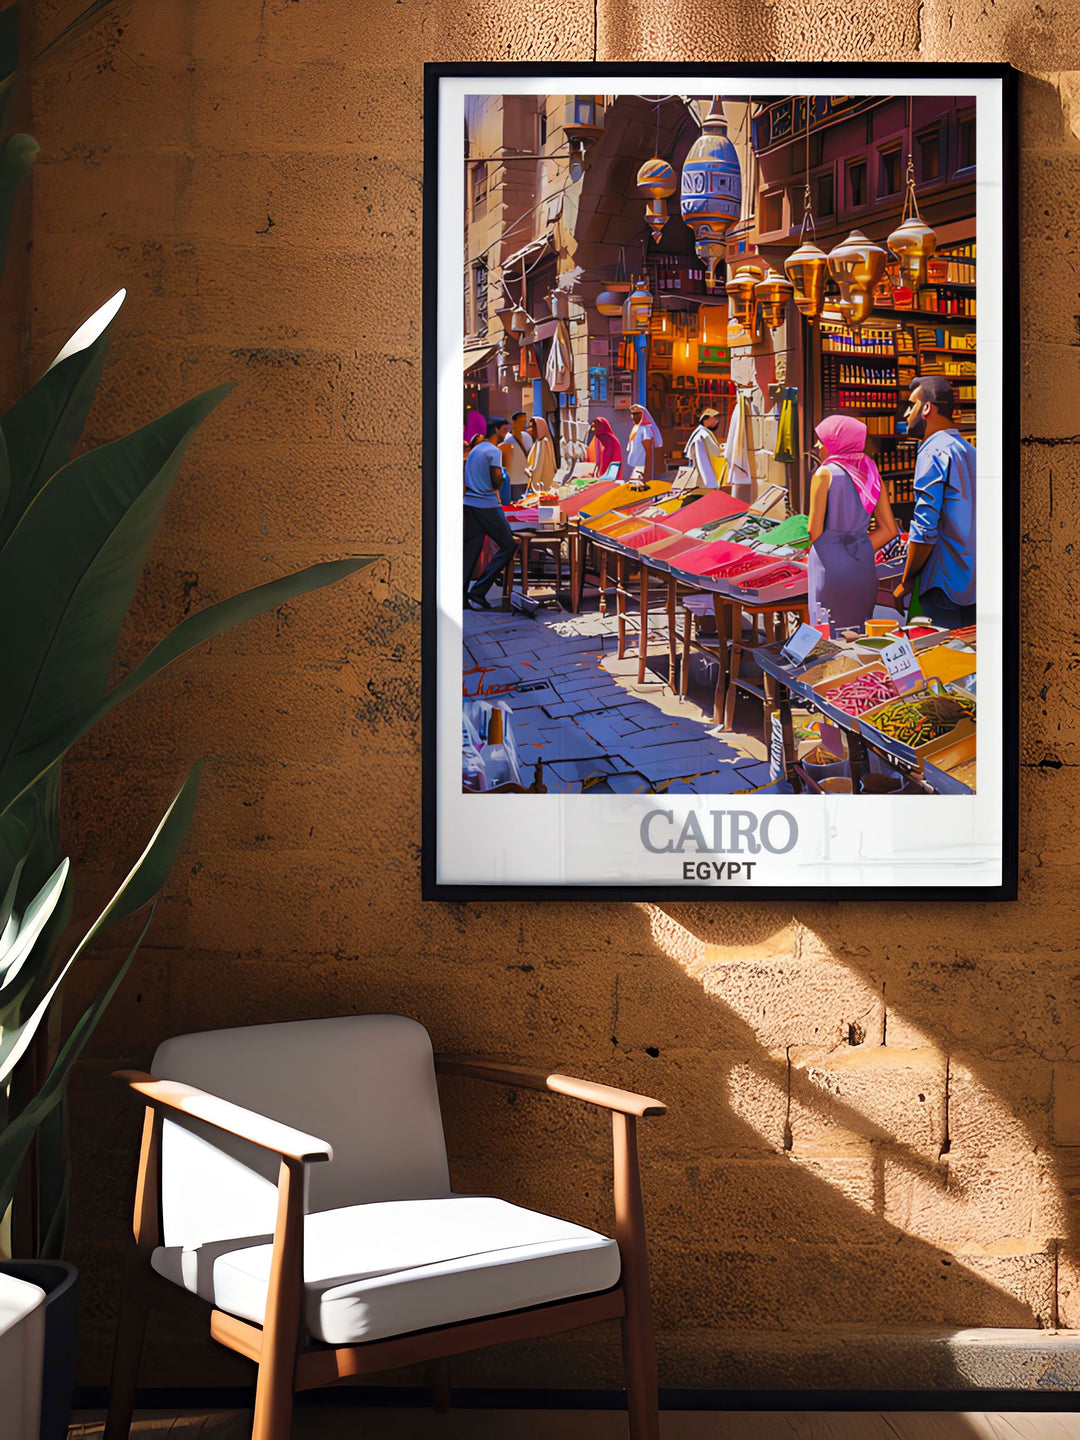 This high quality digital download of Khan El Khalili Bazaar in Cairo captures the essence of the marketplace and cityscape perfect for creating a stunning wall art display in your home